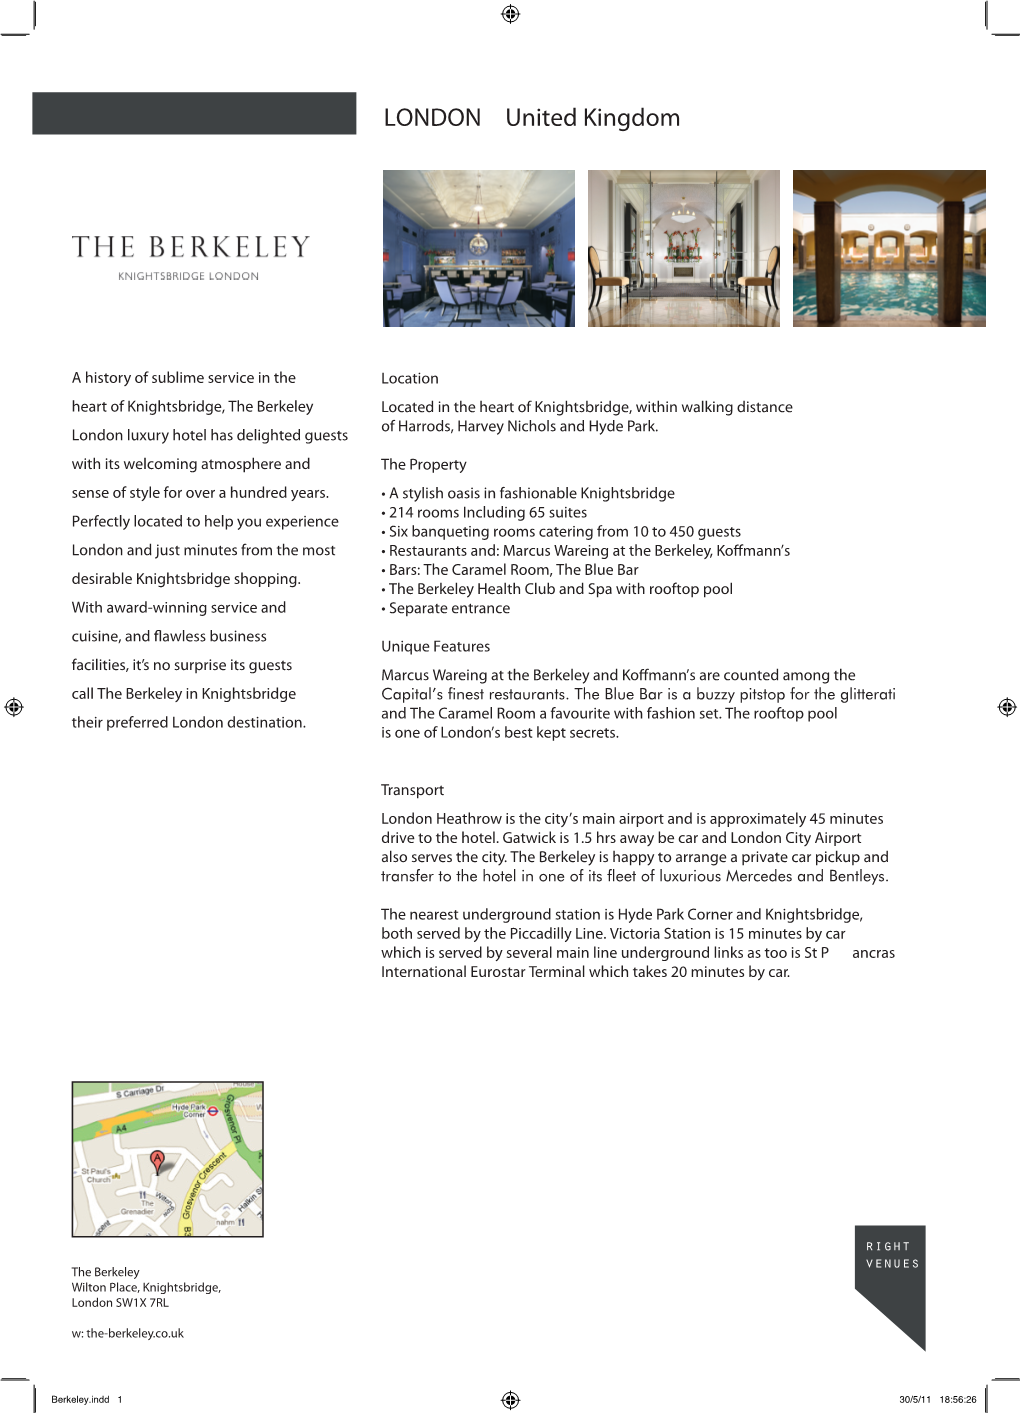 The Berkeley Located in the Heart of Knightsbridge, Within Walking Distance of Harrods, Harvey Nichols and Hyde Park